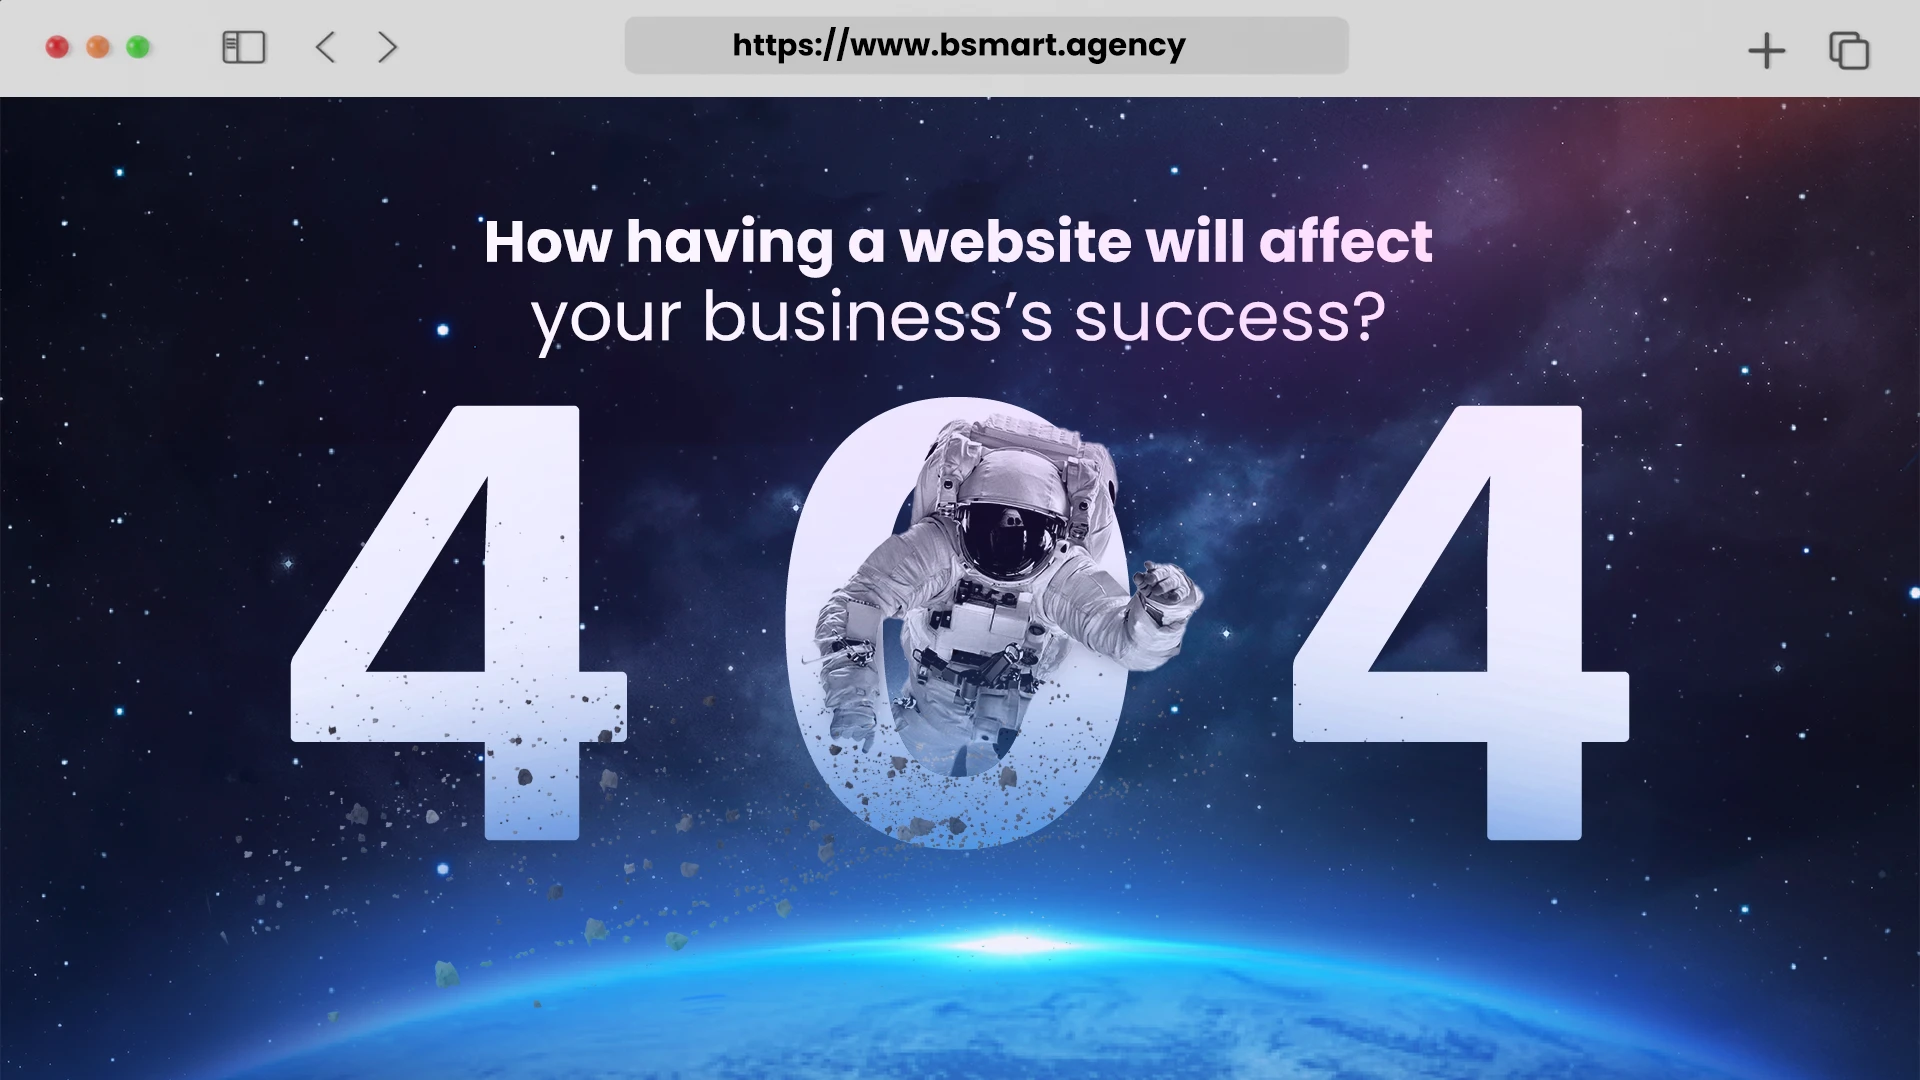 How having a website will affect your business’s success